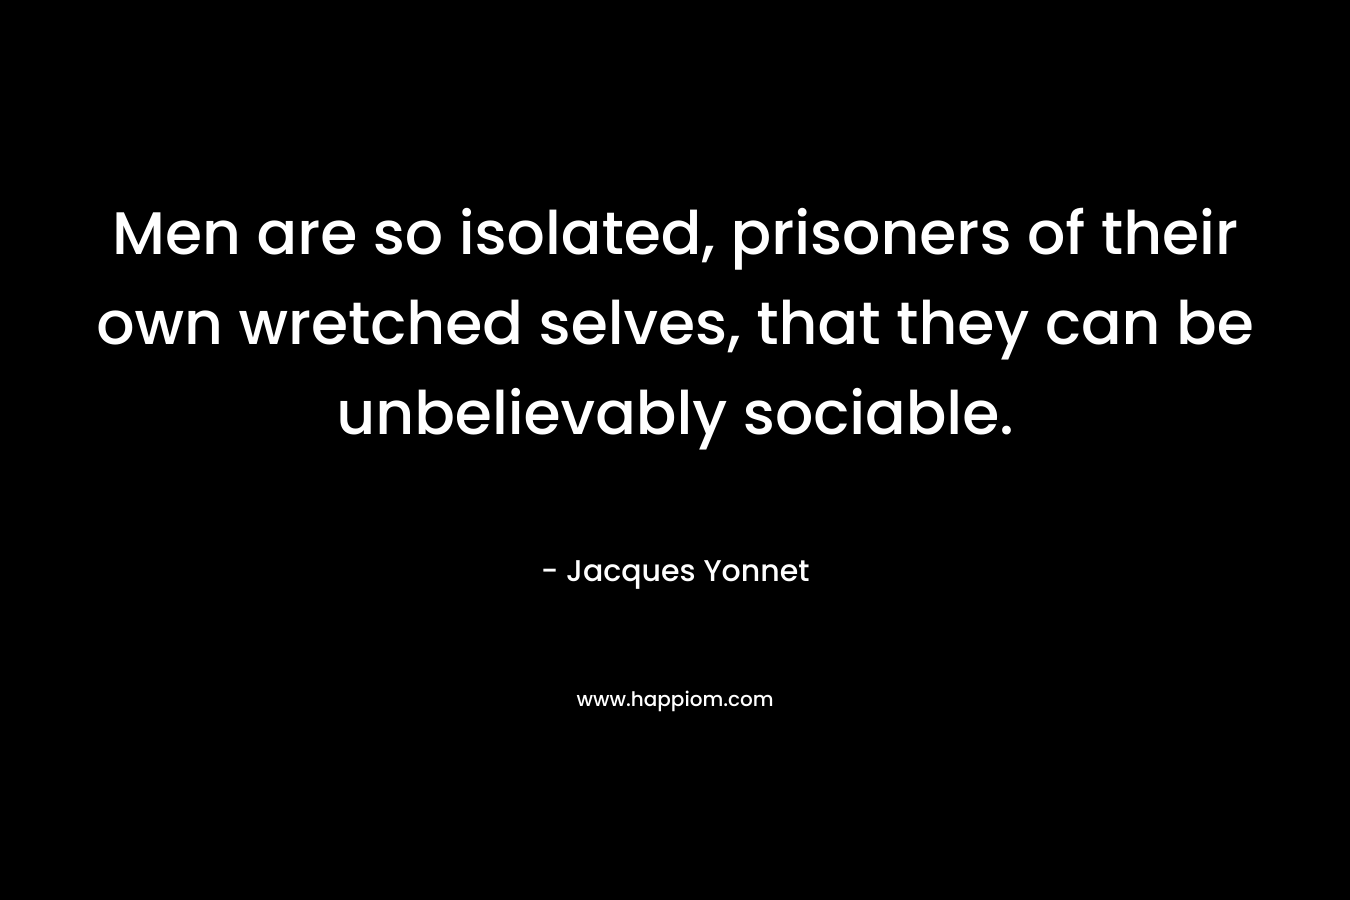 Men are so isolated, prisoners of their own wretched selves, that they can be unbelievably sociable. – Jacques Yonnet